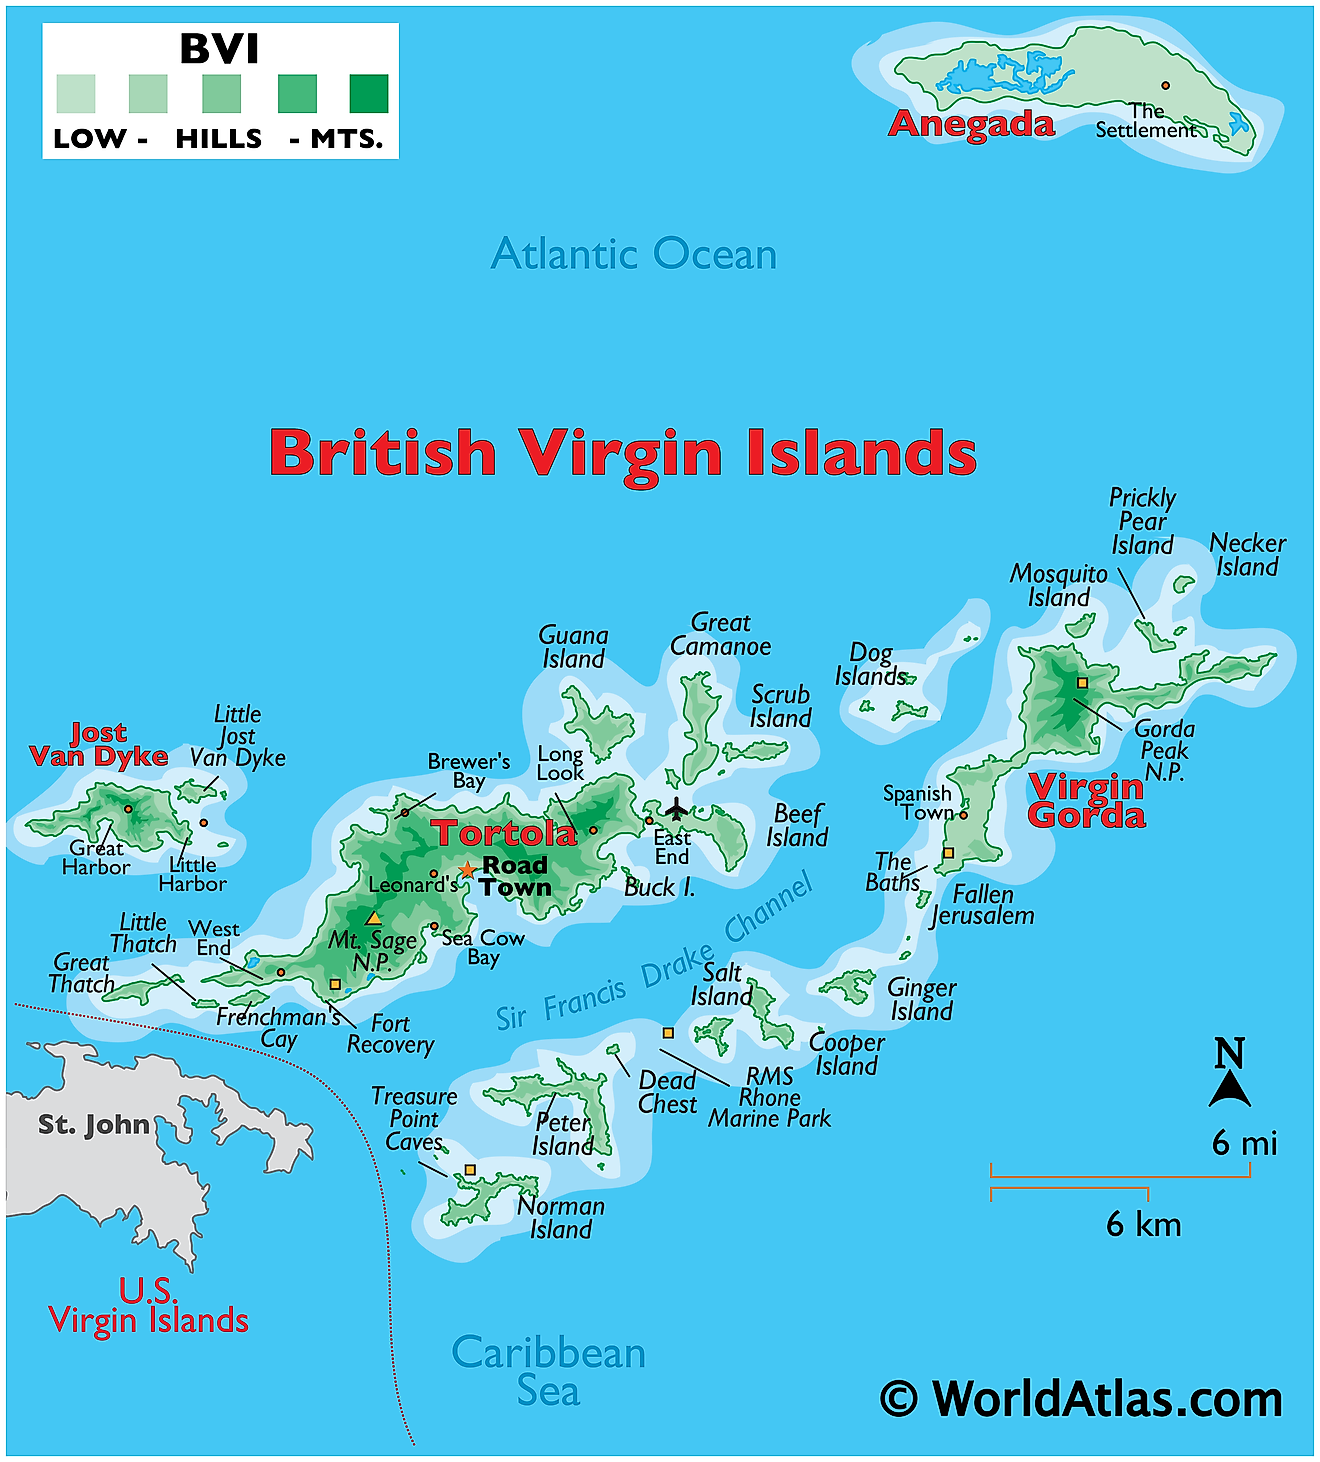 Physical Map of British Virgin Islands. It shows the physical features of the British Virgin Islands